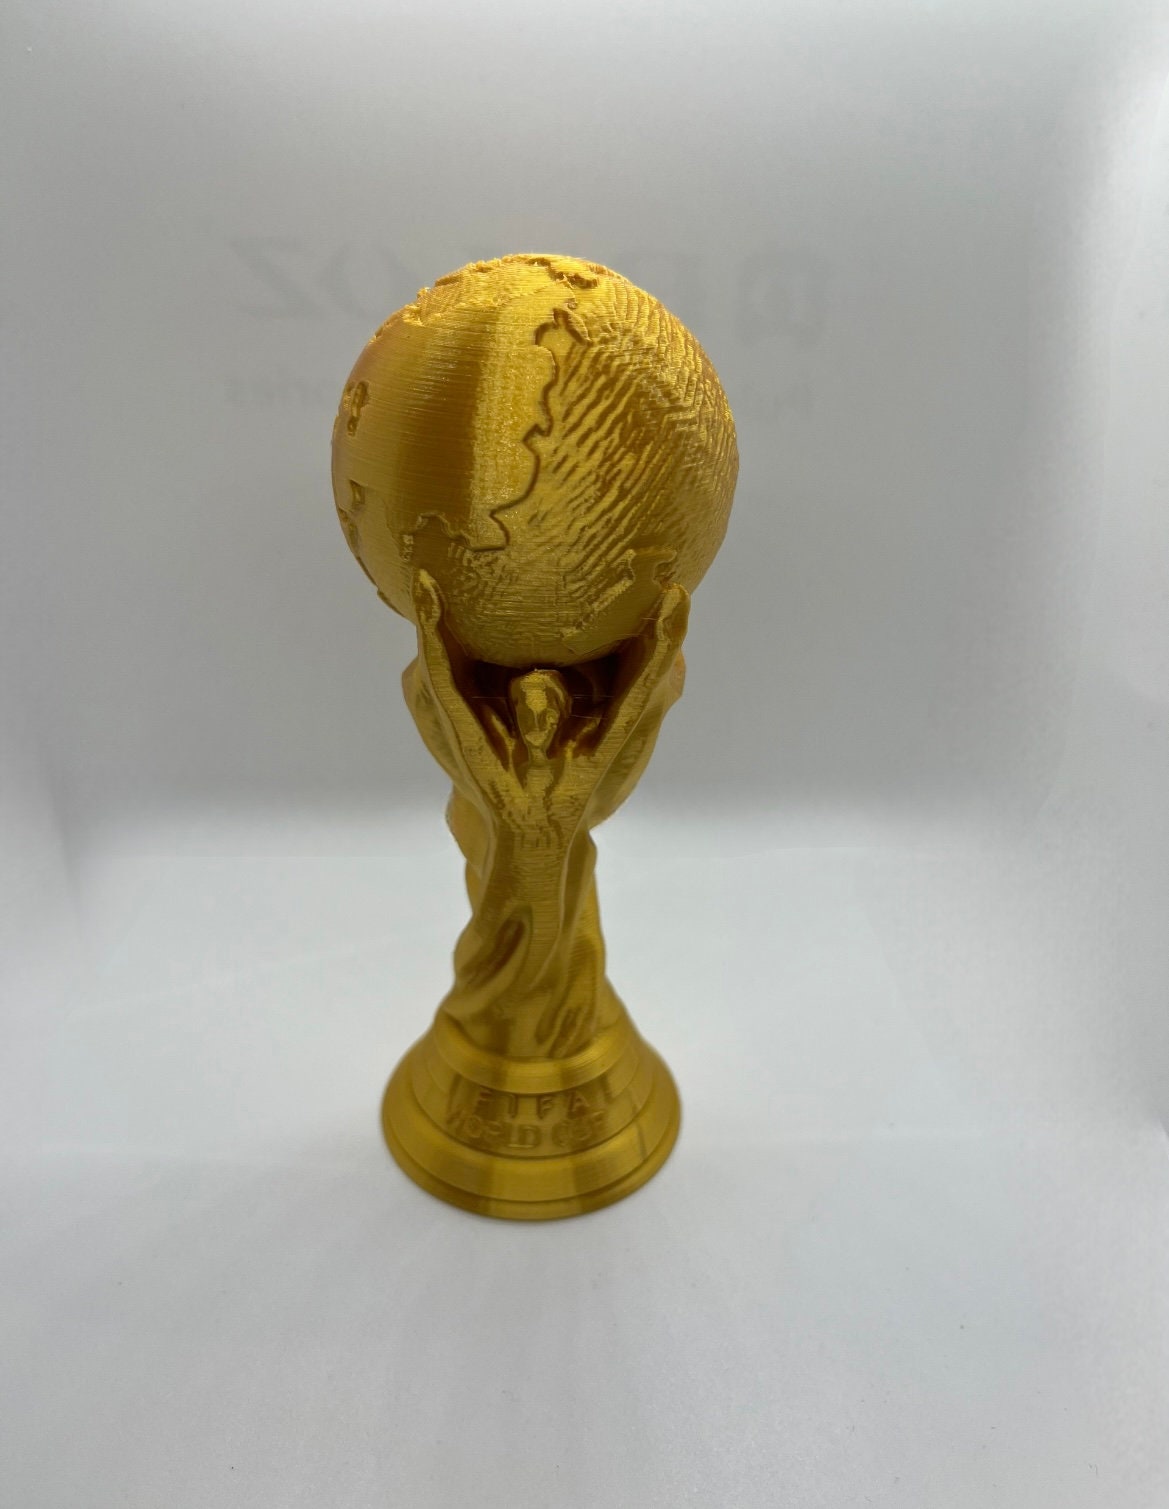 LNGODEHO 2022 World Cup Replica Trophy in Display Case, Resin Sculpture,  Own a World Soccer's Biggest Prize (10.6 inch)